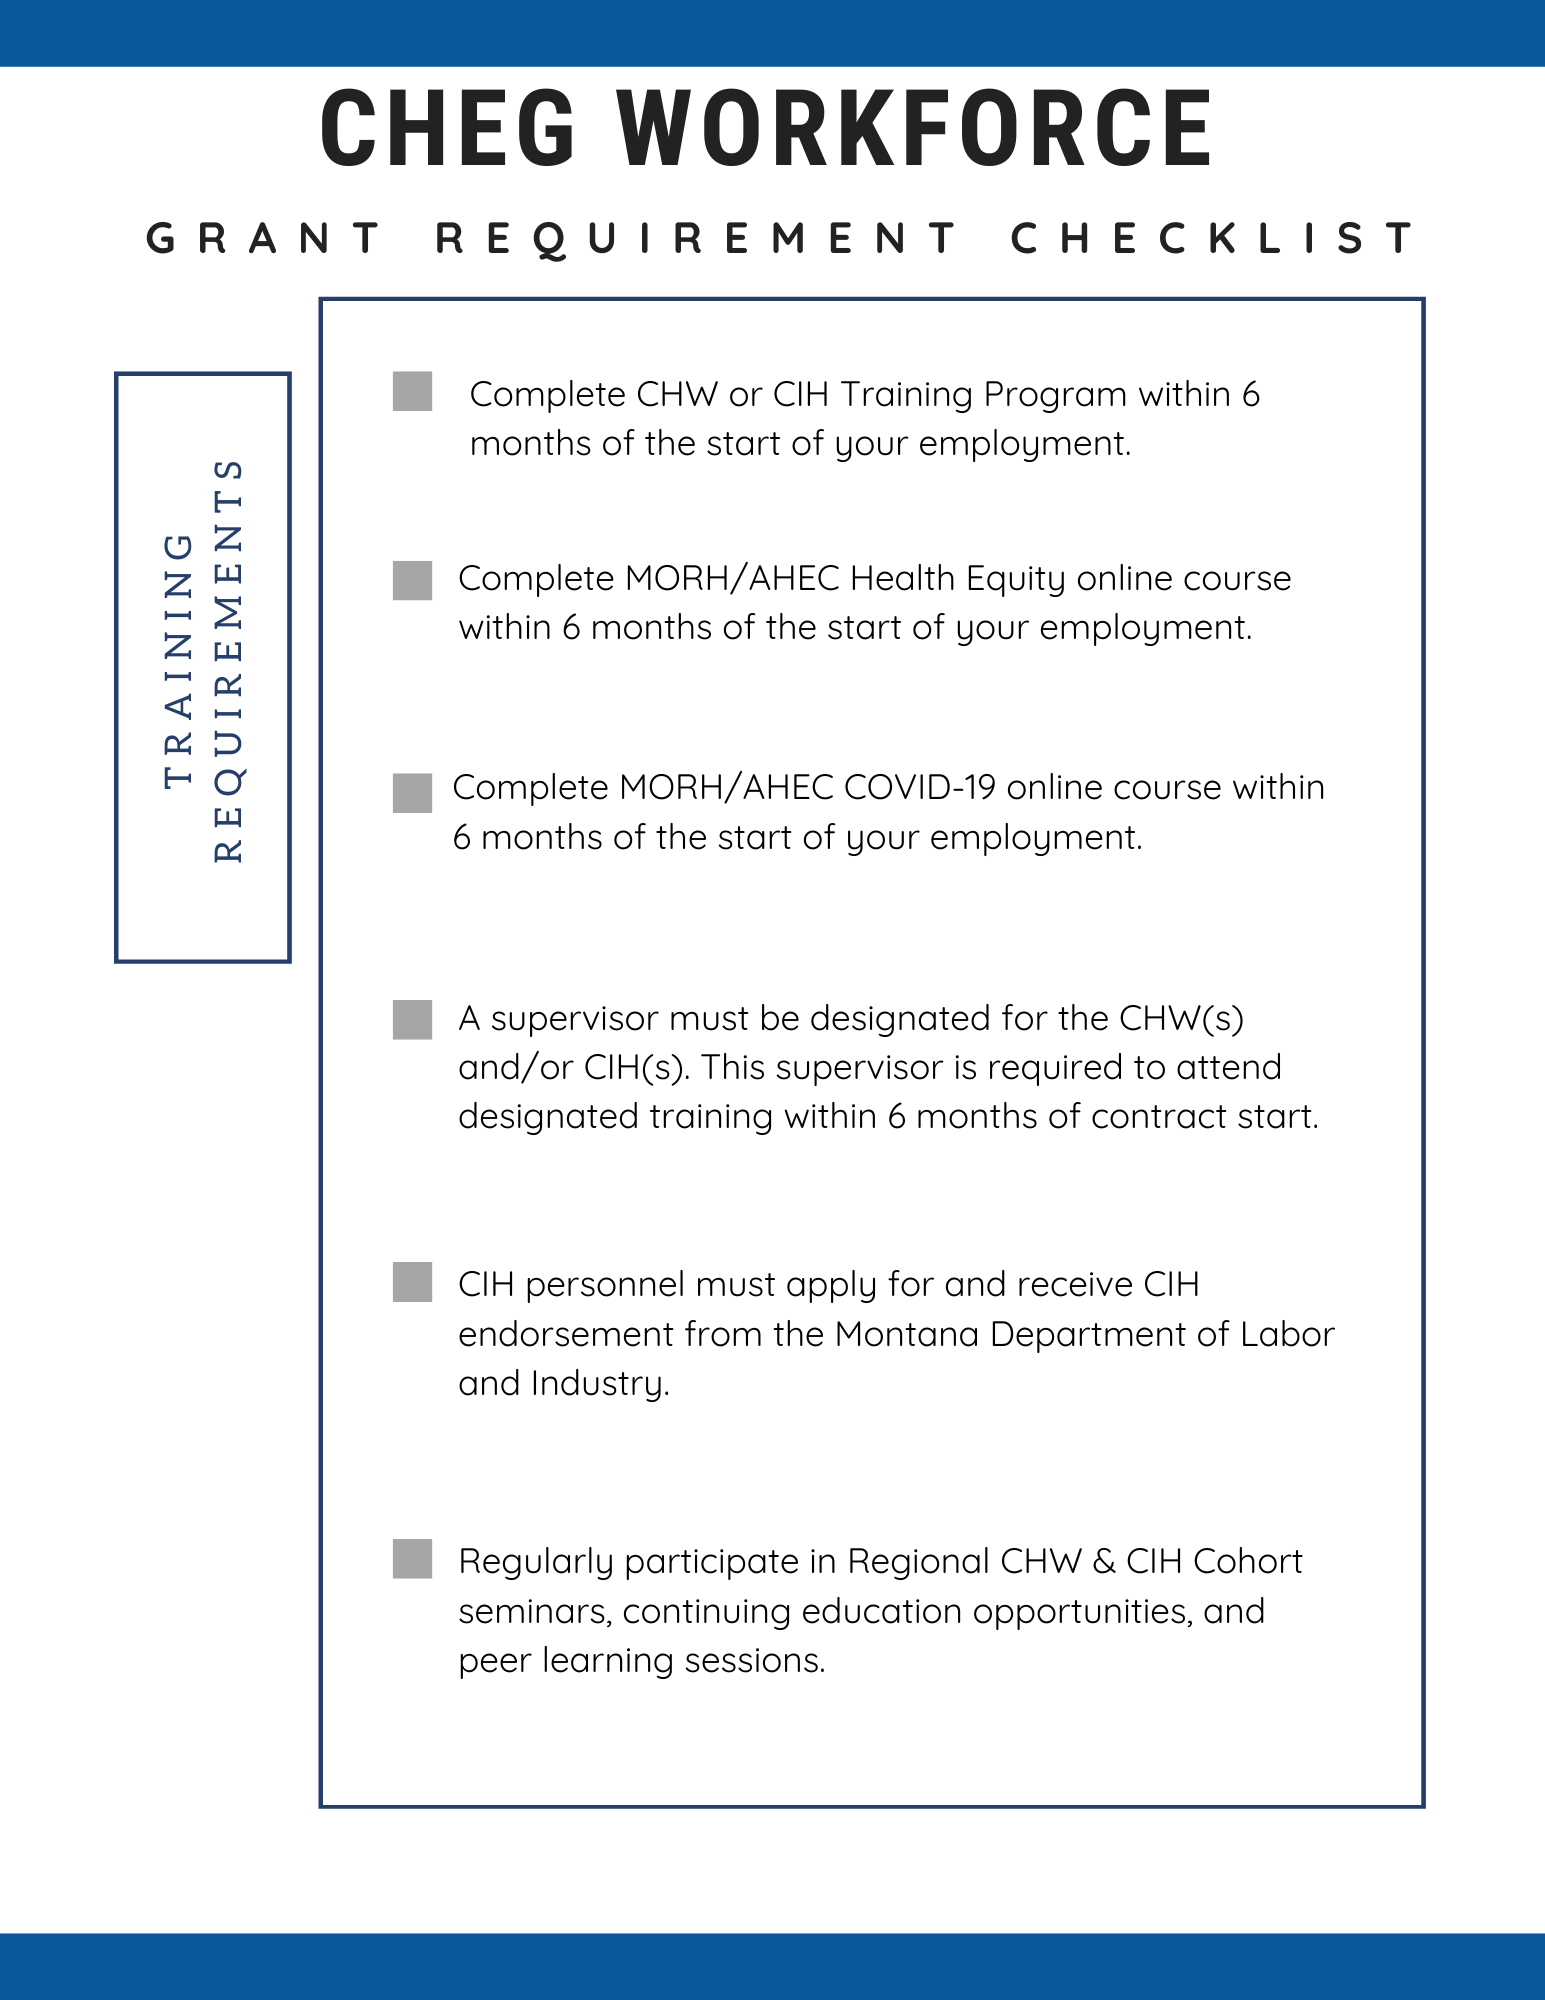 CHEG Training Requirements